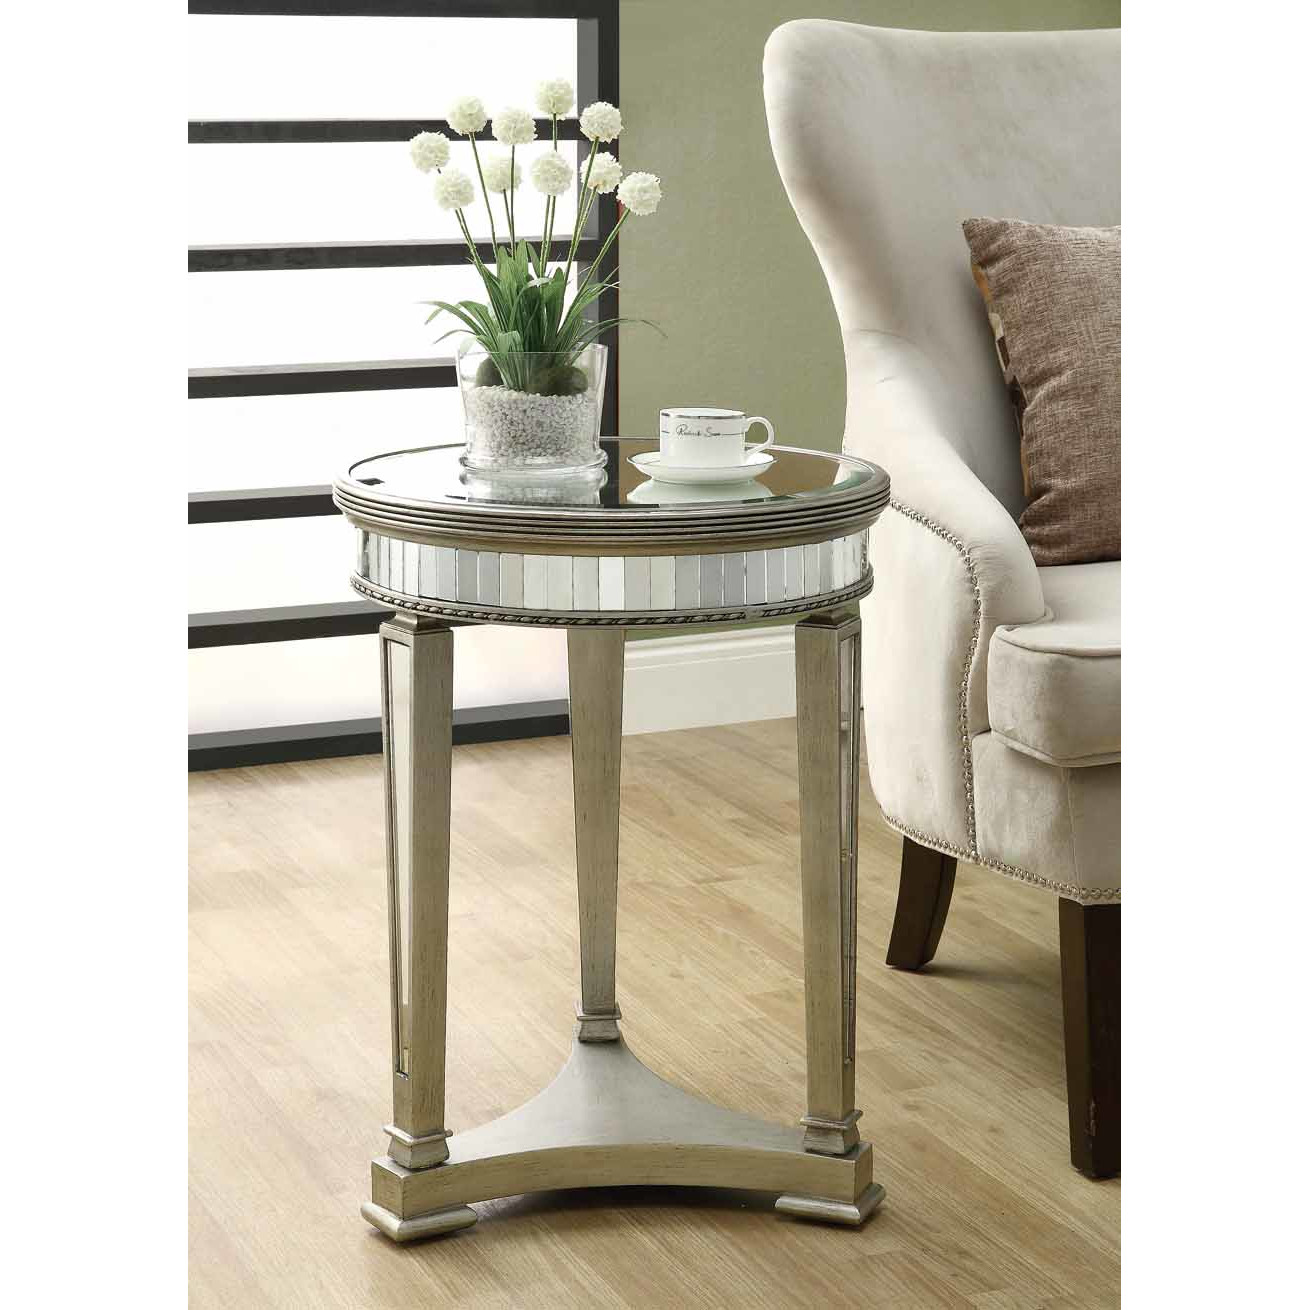 monarch specialties inc mirrored end table reviews wicker accent with mirror round coffee and sets inch console antique lift aluminum living room sofa side height beautiful tables